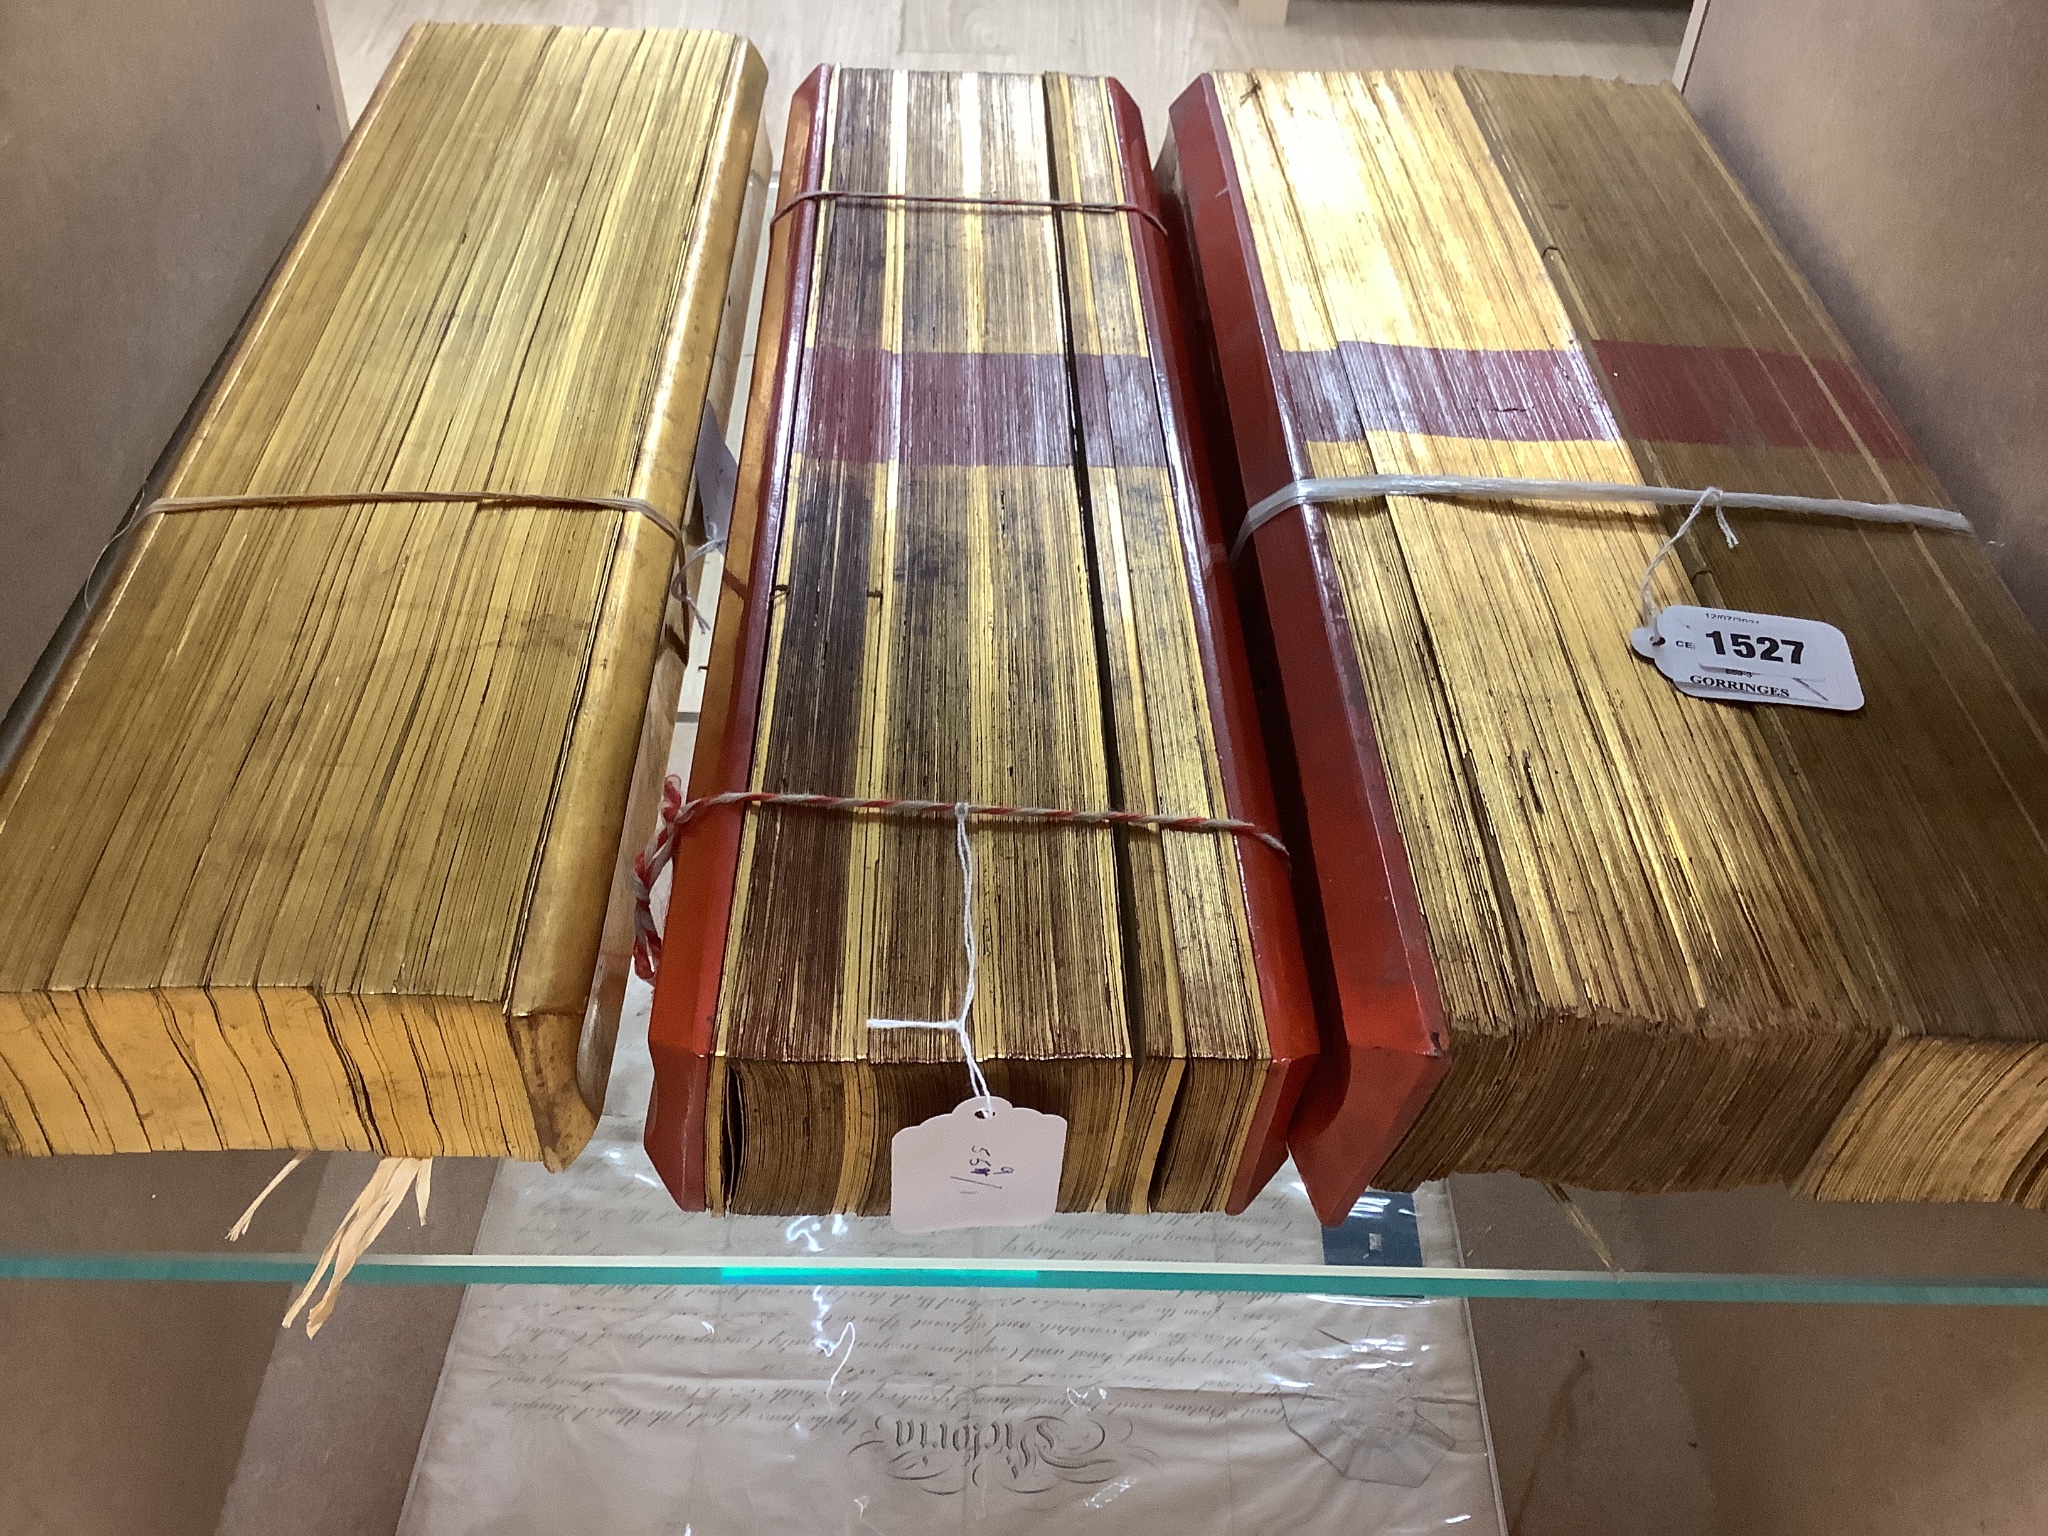 Three 19th century Burmese lacquered Sutra manuscripts, each written in Pali on bamboo leaves, gold leaf edging